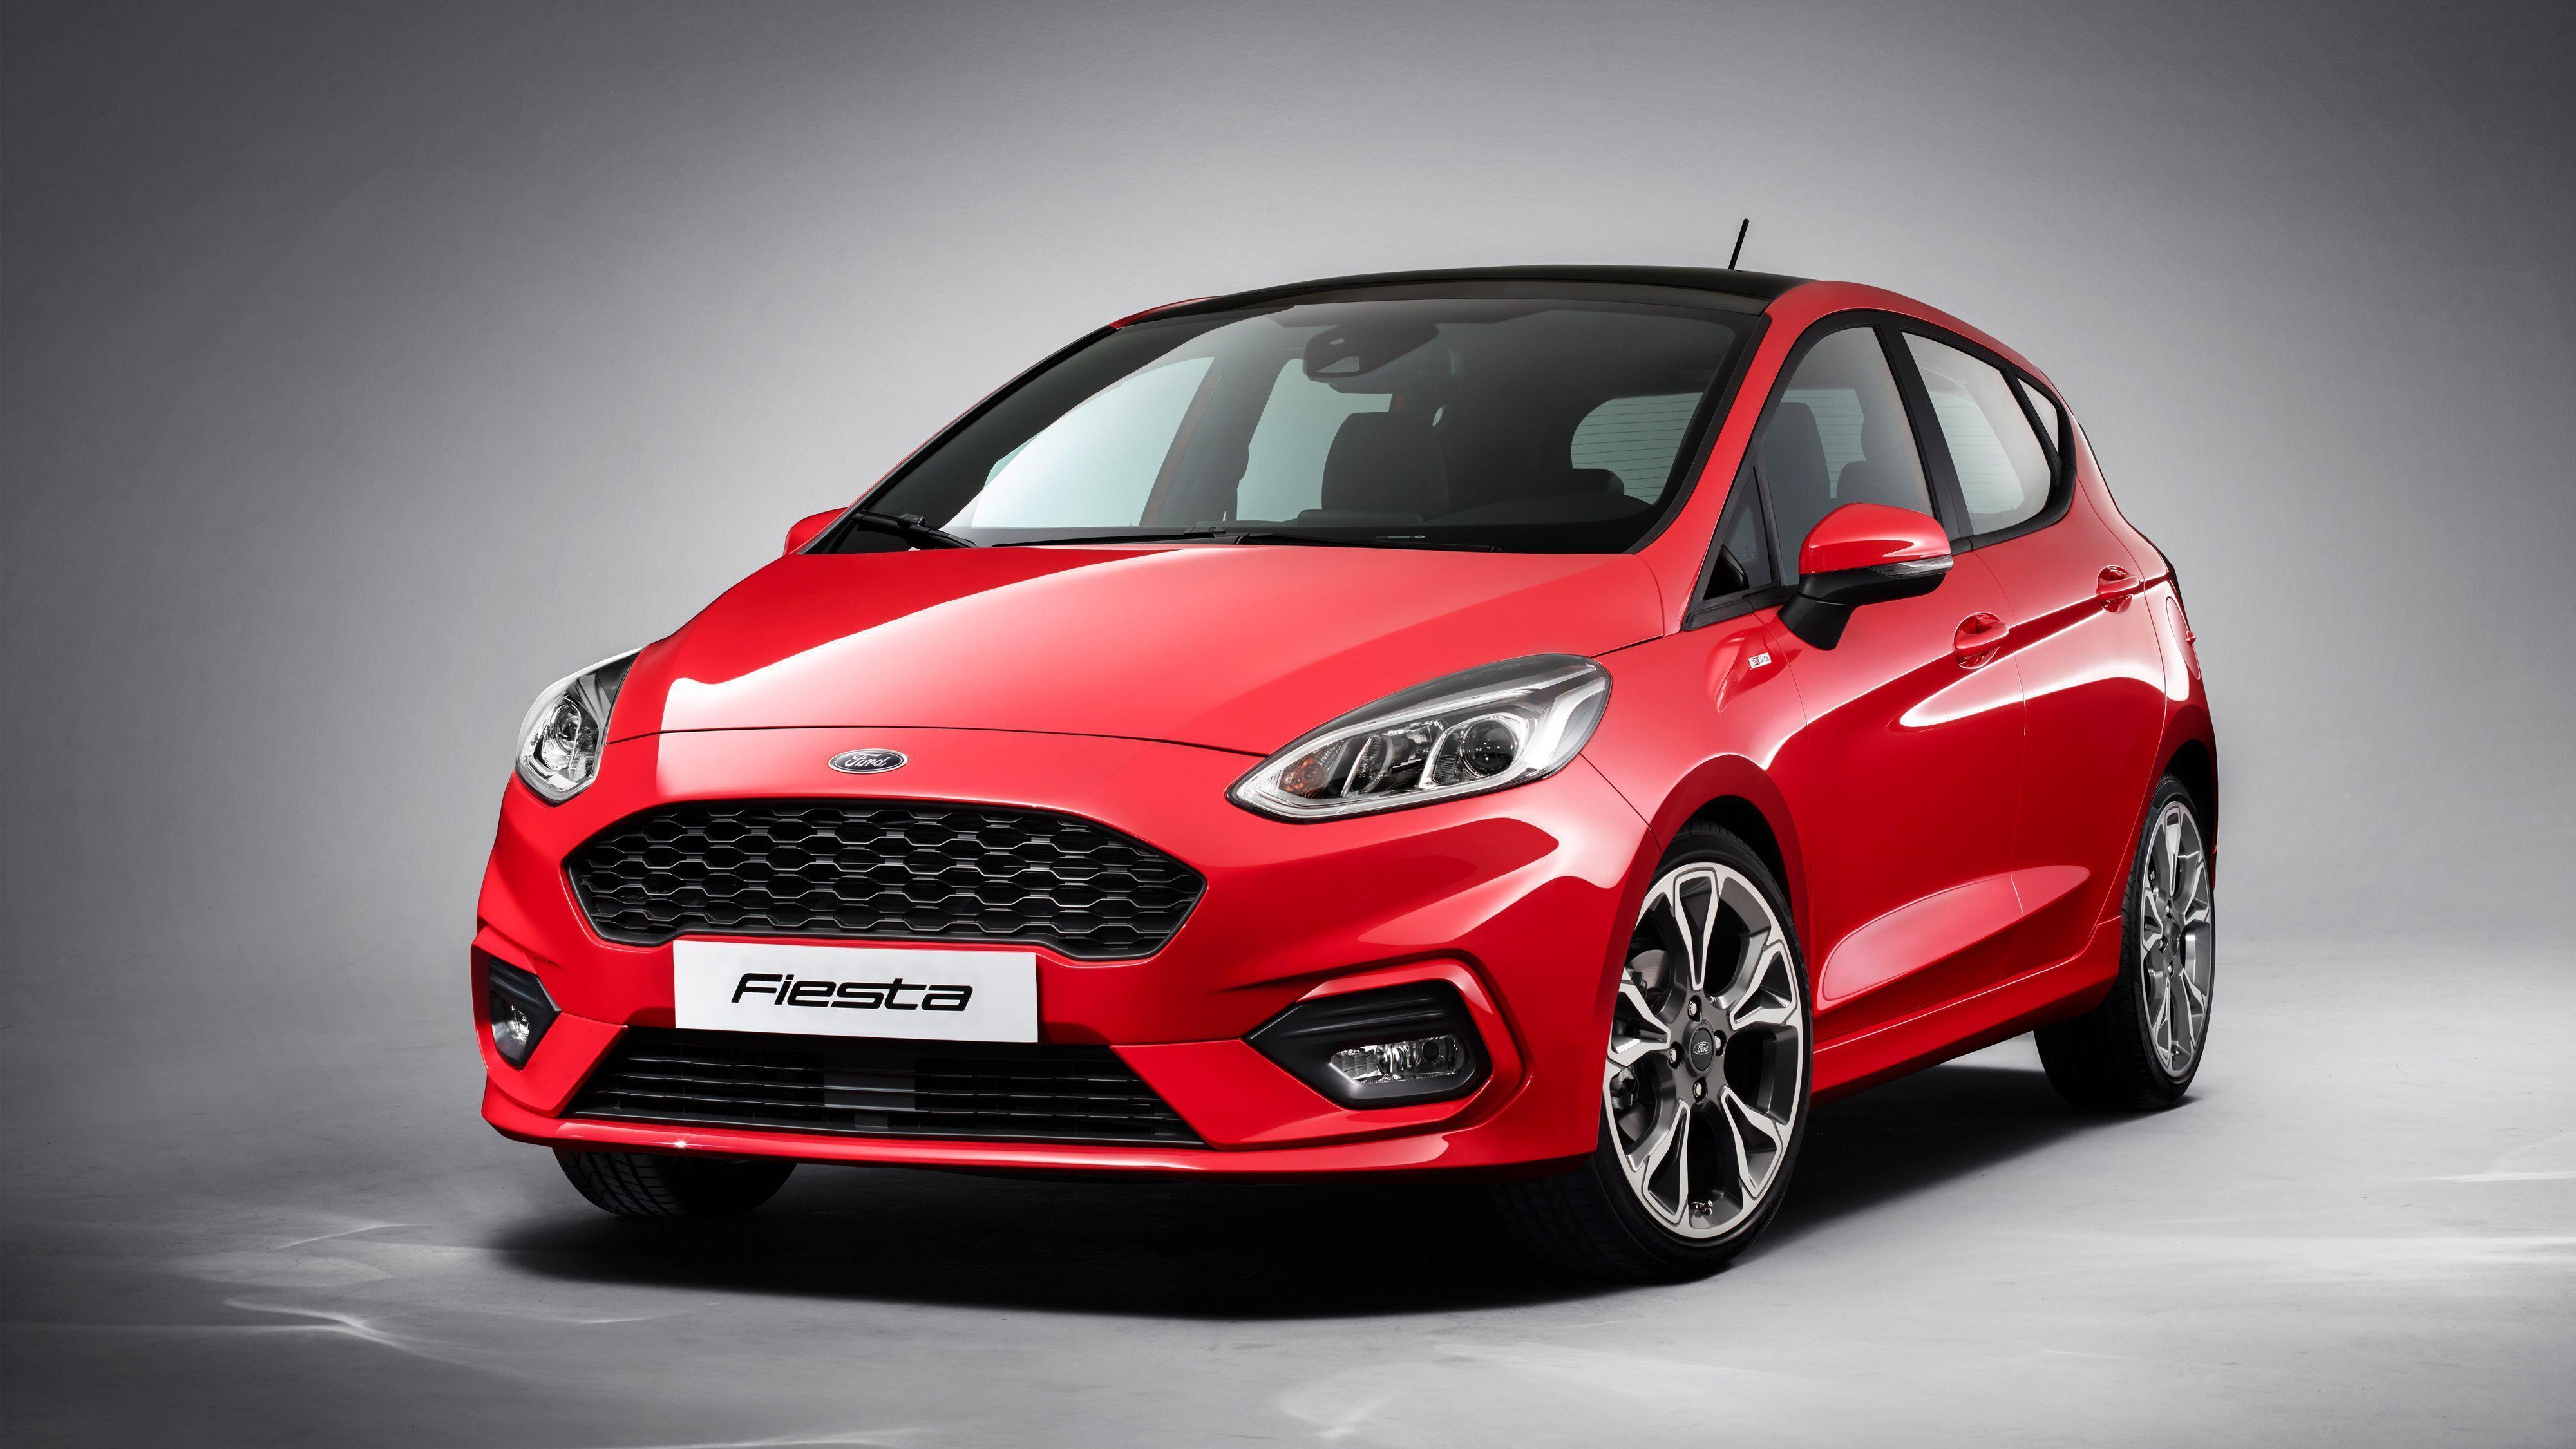 Ford Fiesta Wallpapers Top Free Ford Fiesta Backgrounds Wallpaperaccess